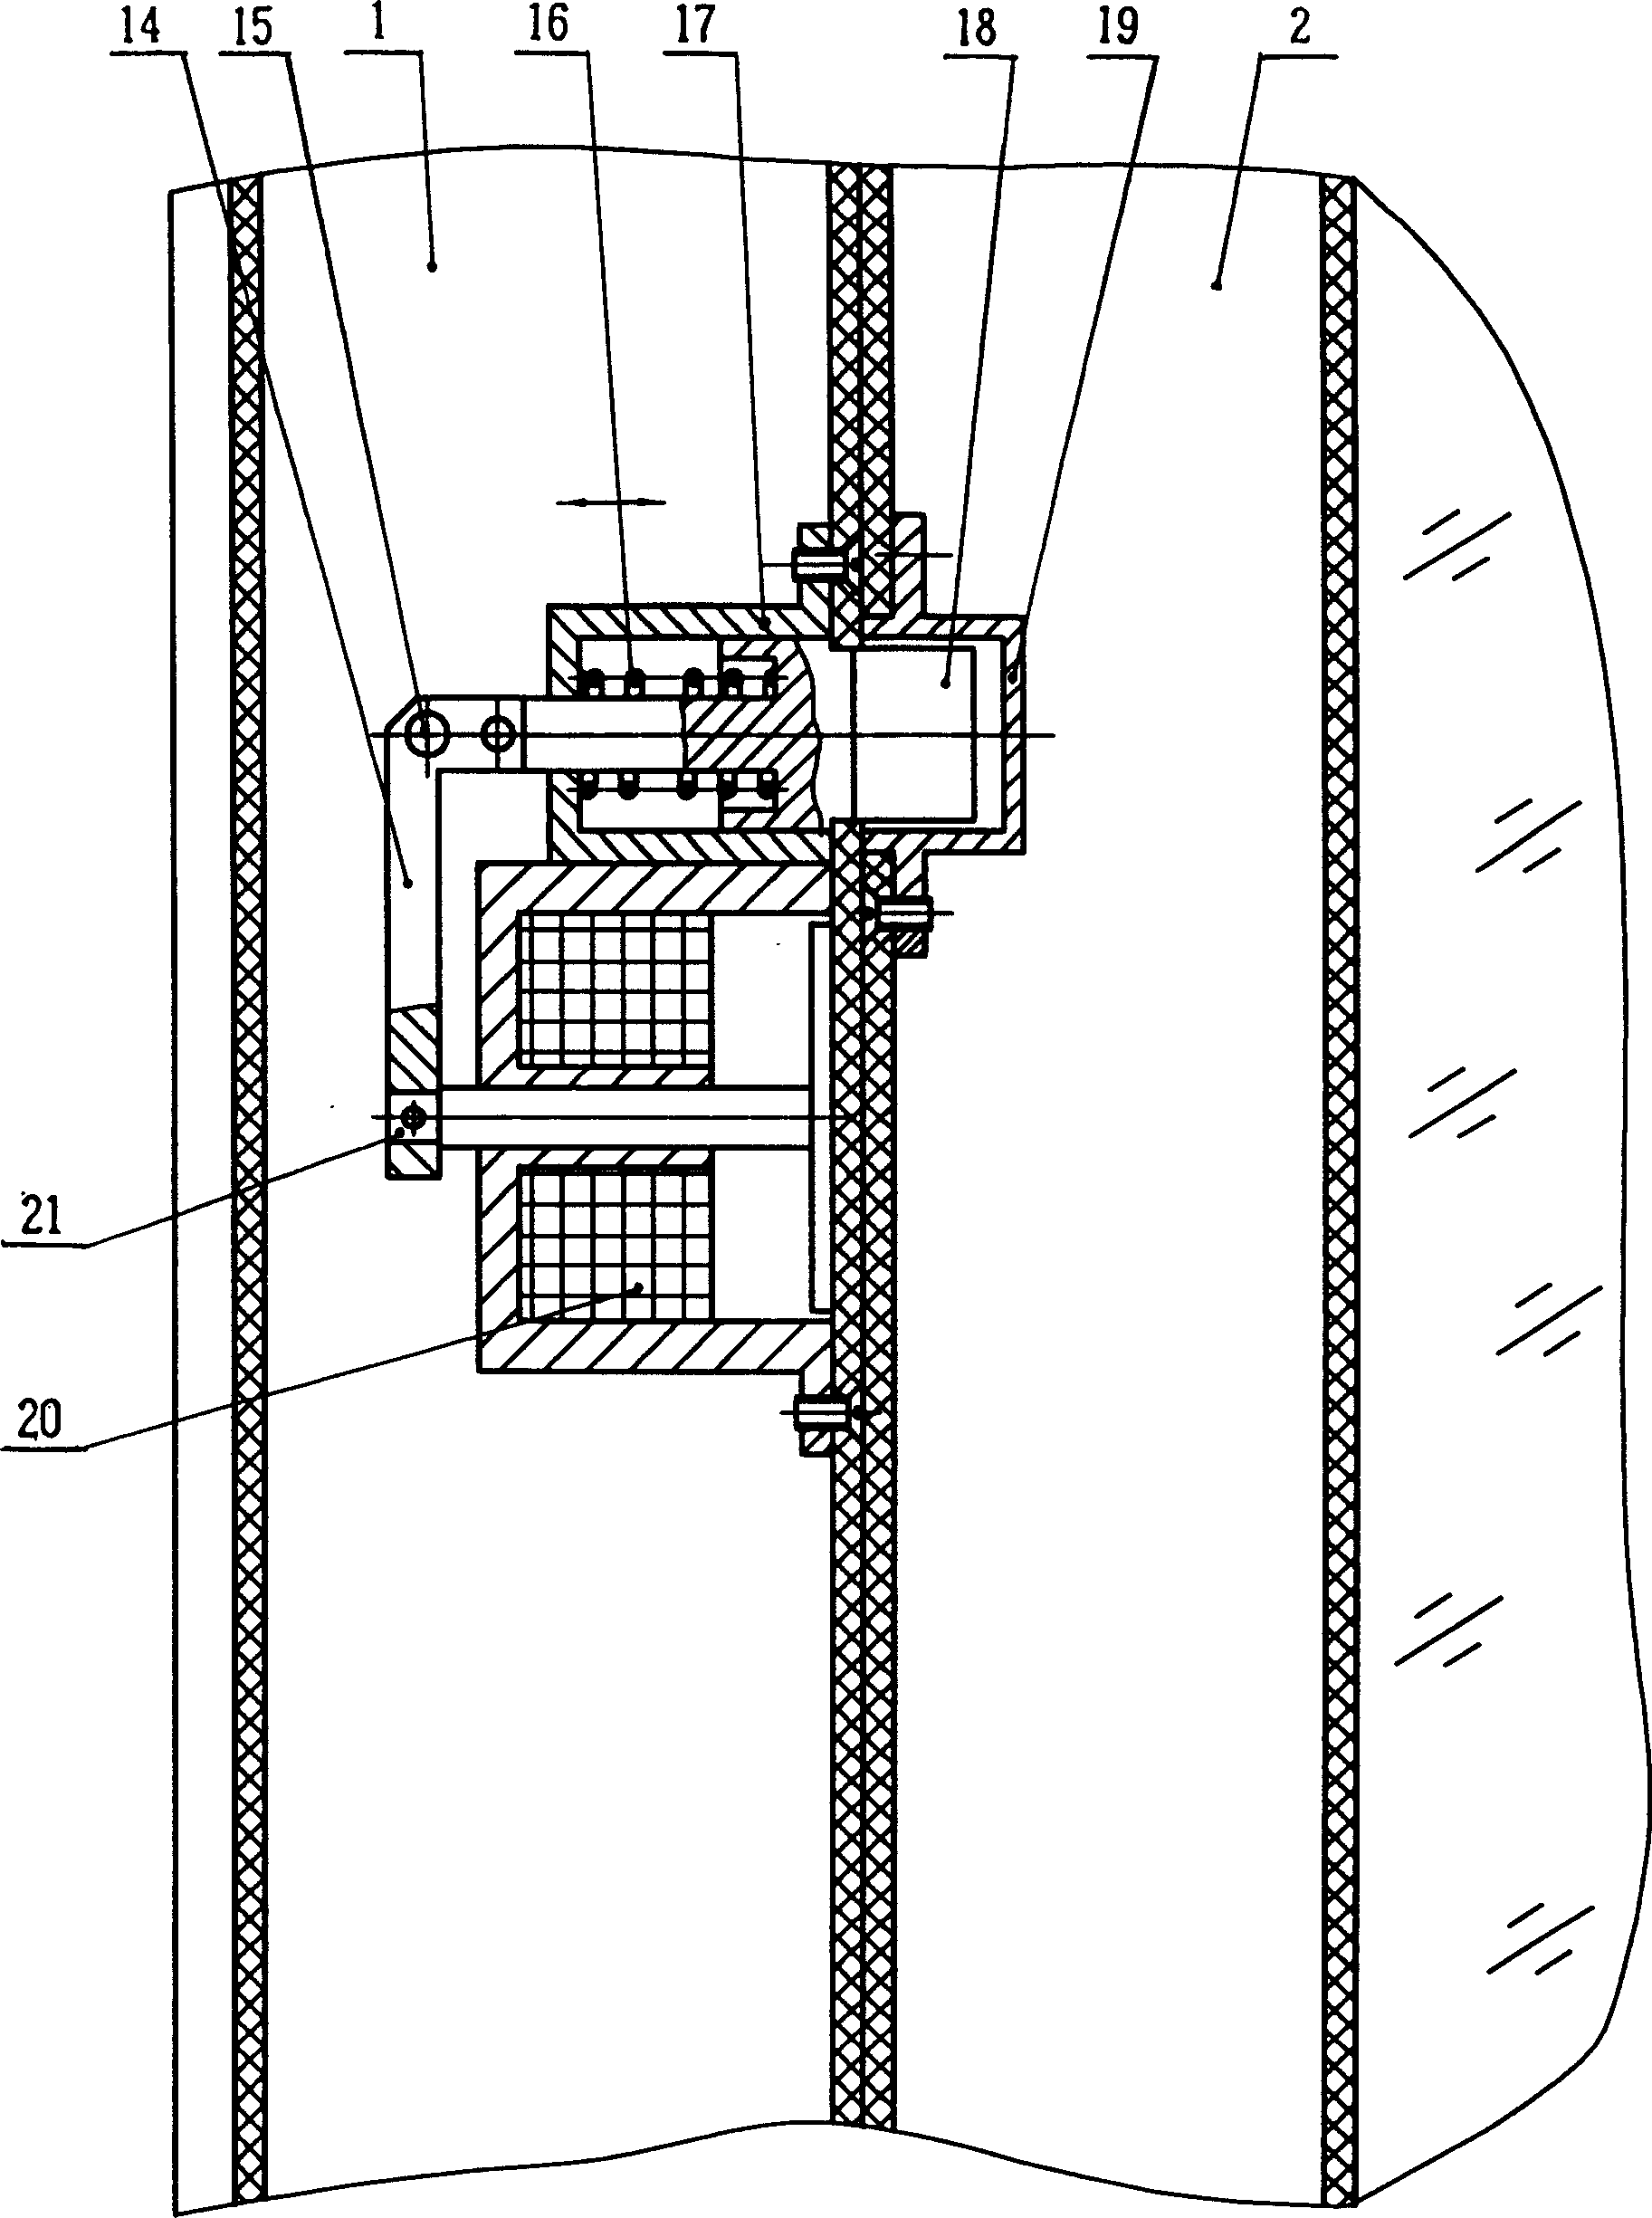 Roatating shaft type electric device for opening windows